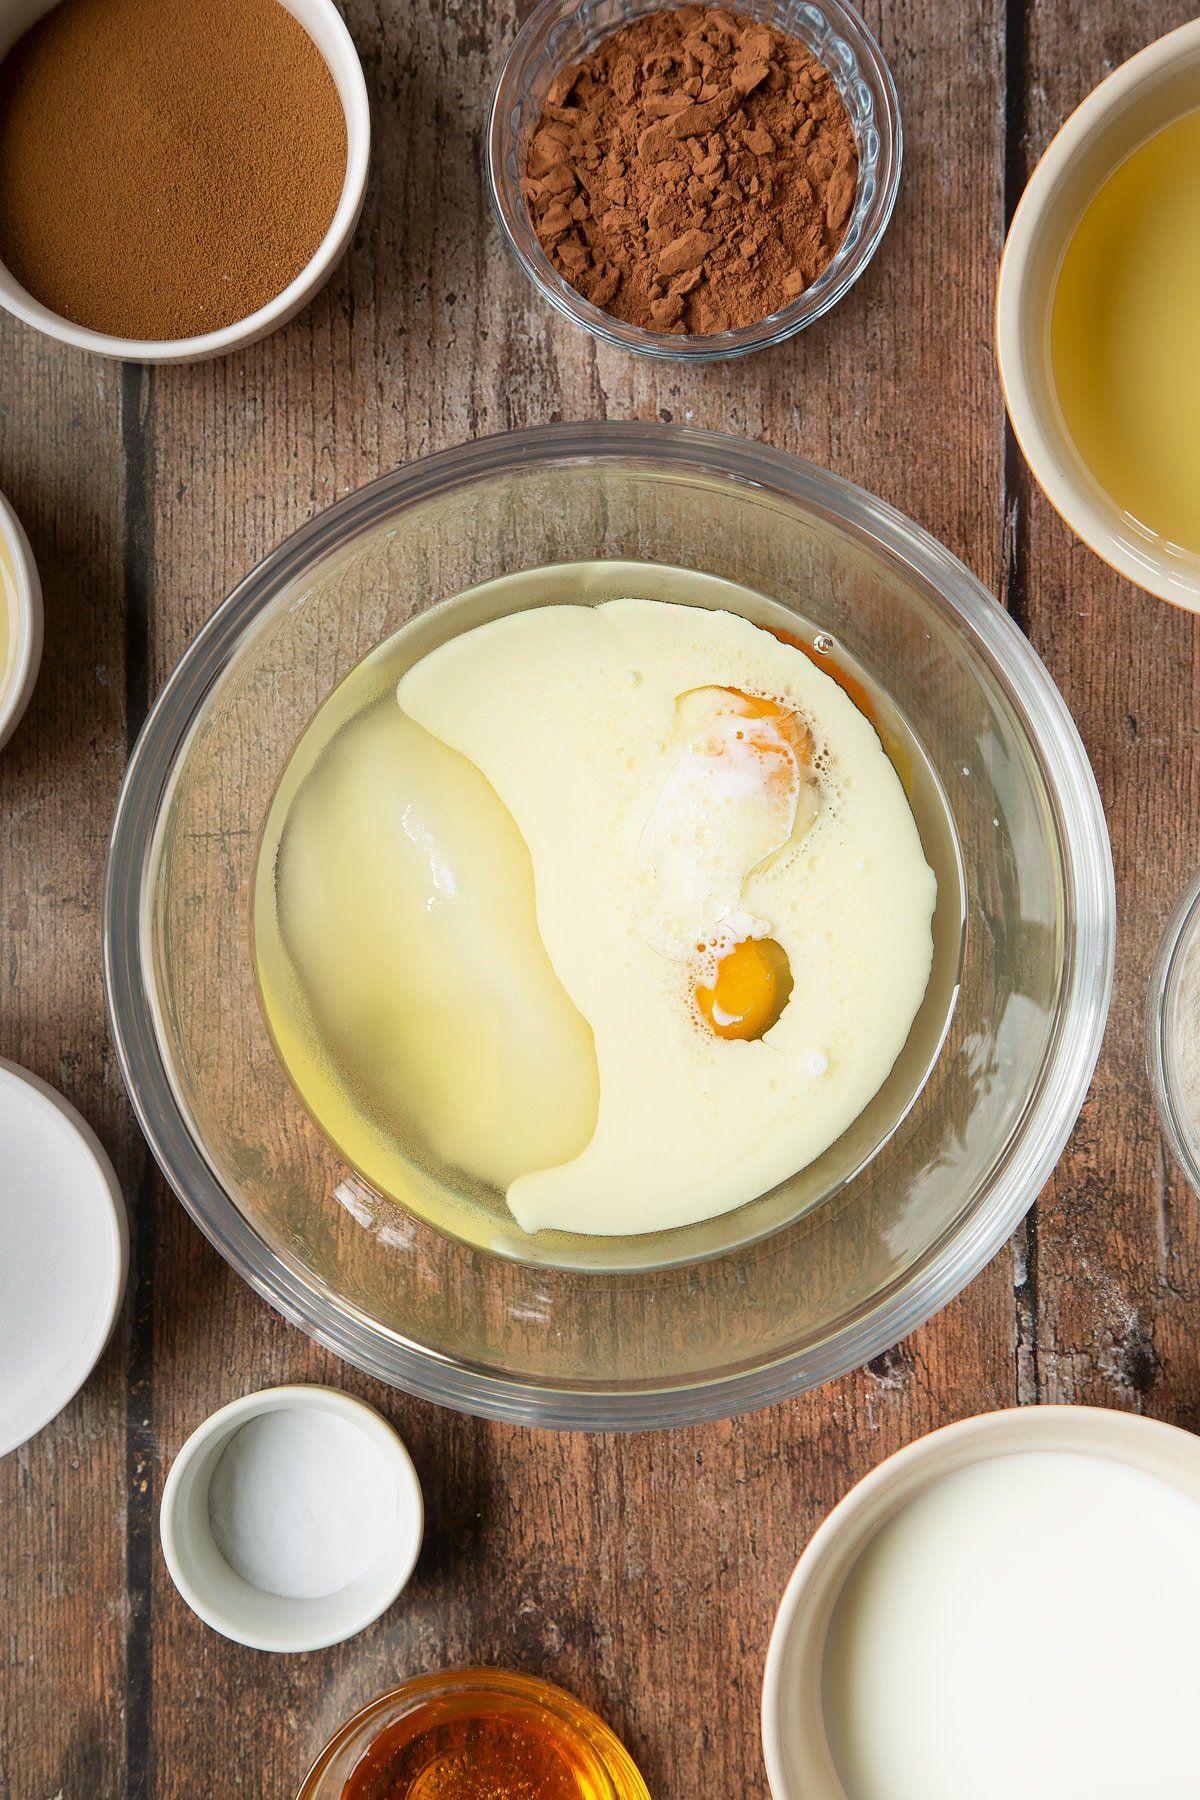 Eggs, sugar, oil, milk and golden syrup in a glass mixing bowl. Surrounding the bowl is ingredients to make dalgona coffee cake.